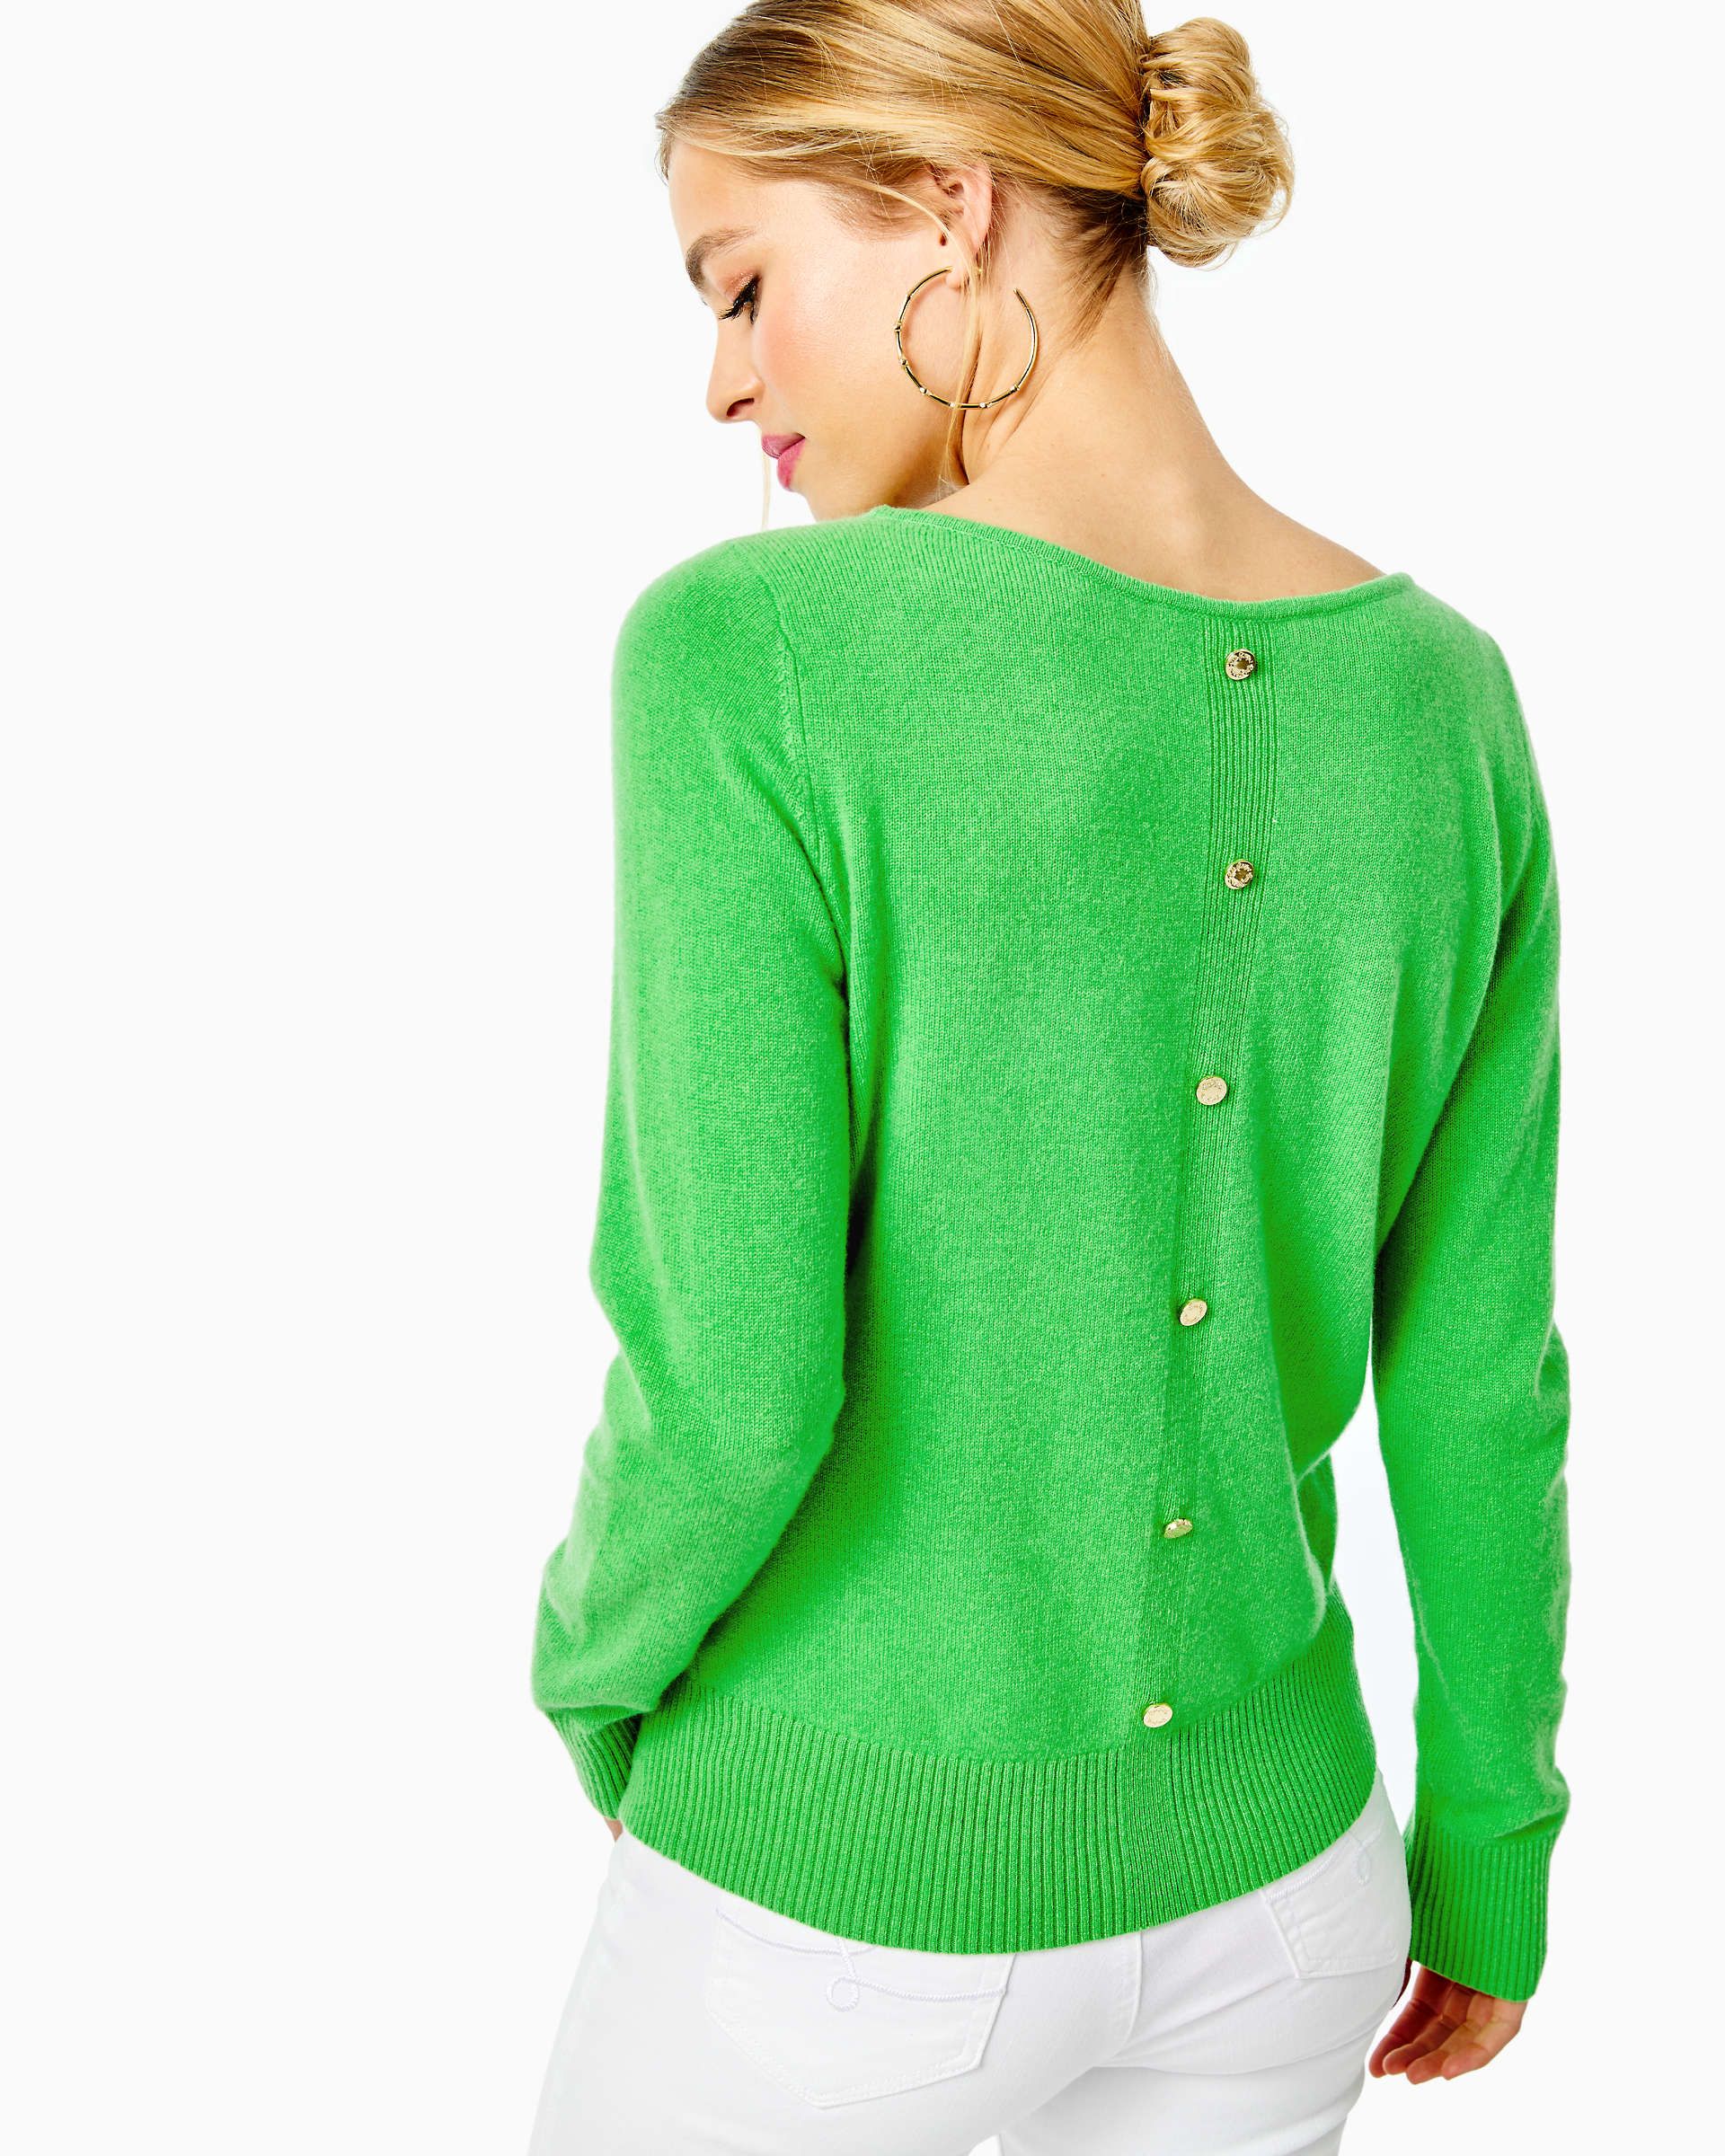 Fairley Cashmere Sweater | Lilly Pulitzer